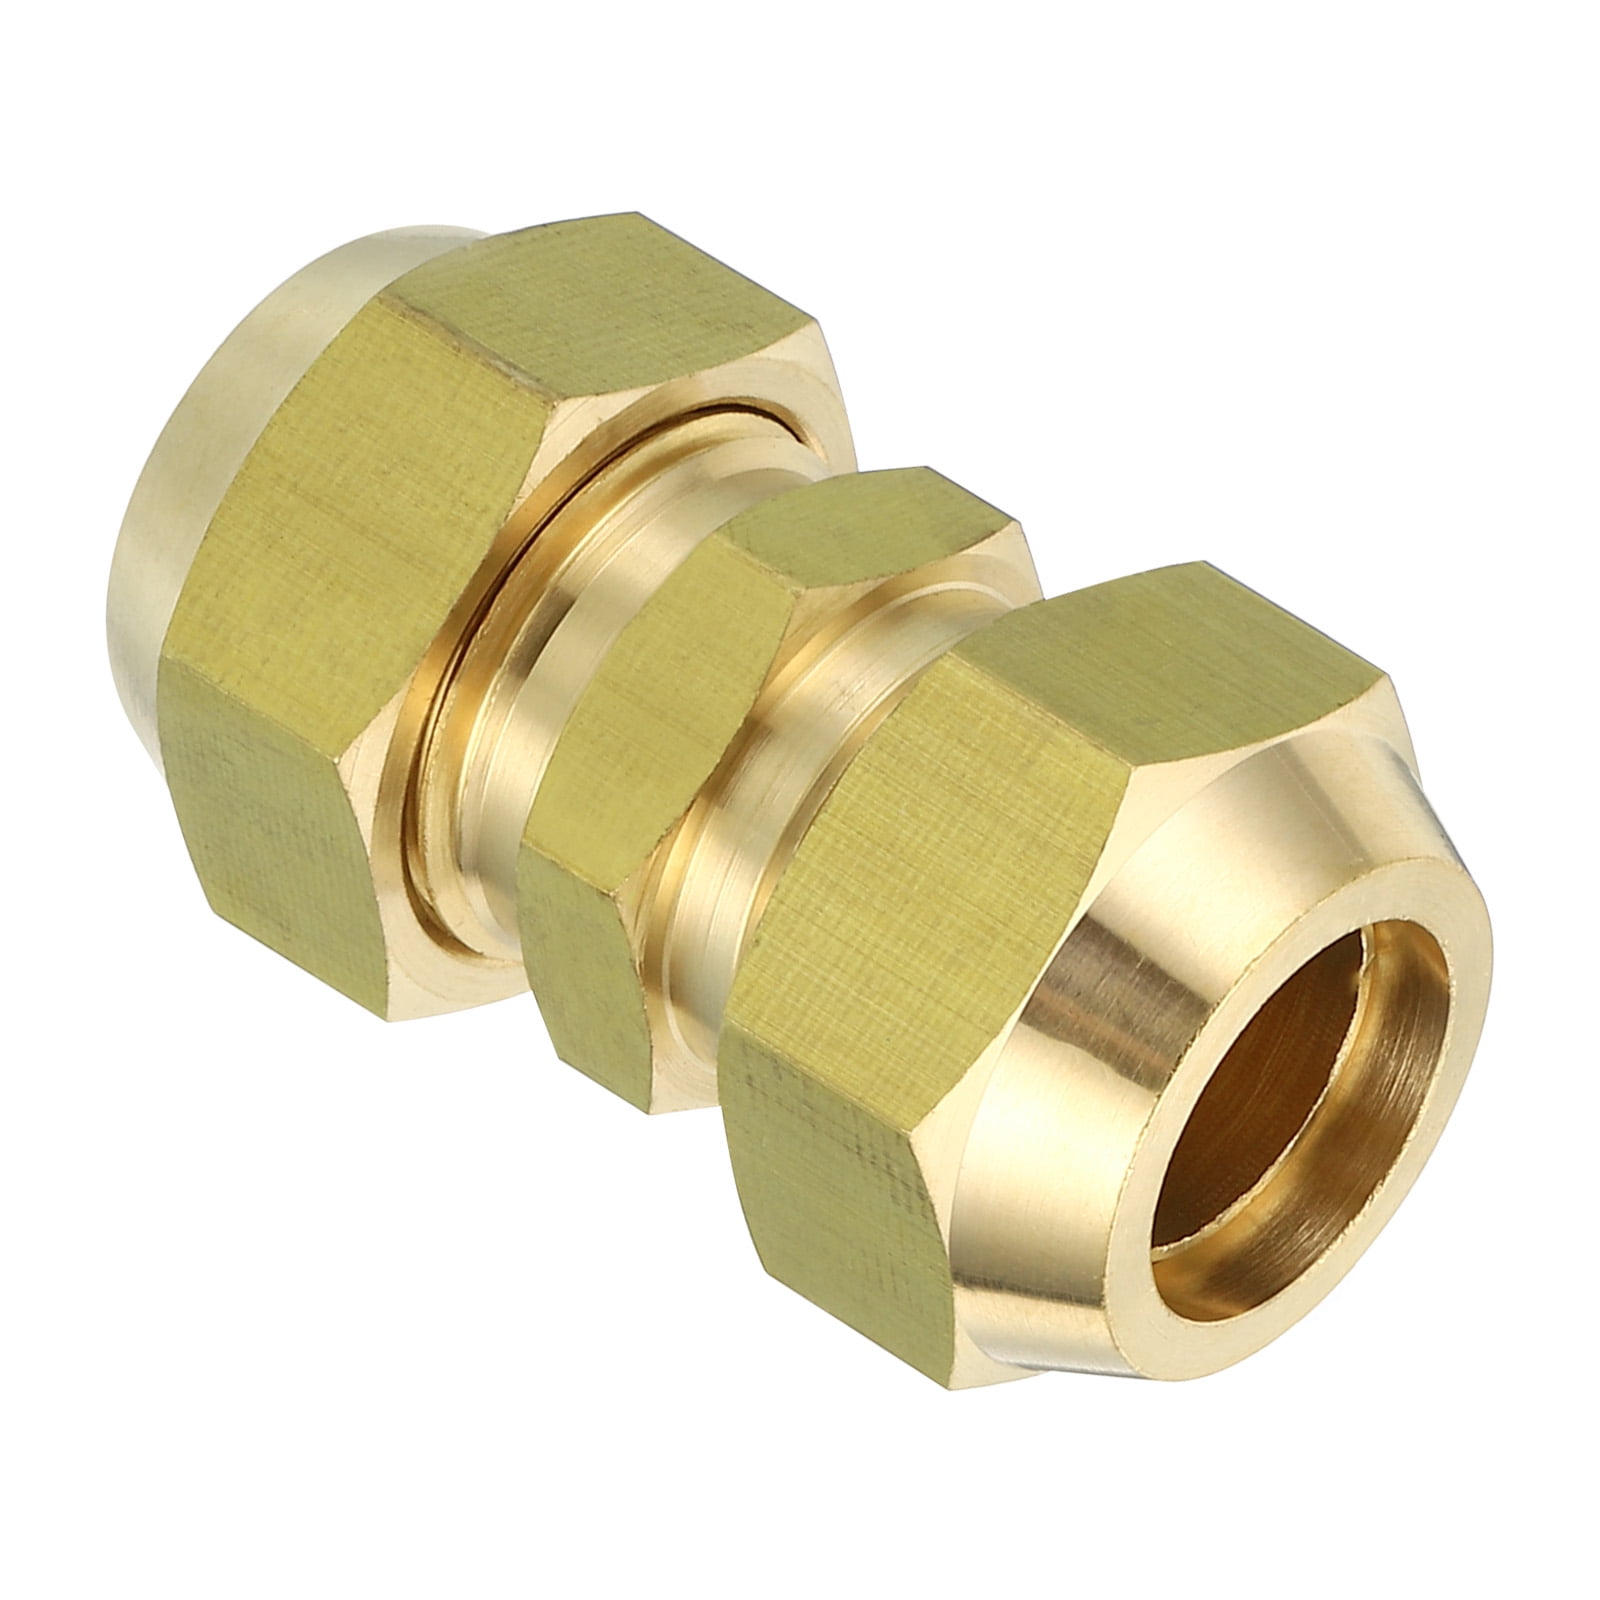 Uxcell 3/4 OD Brass Flare Union Connector, 1 Set Copper Double Pipe  Extension Fitting with Nut, 2.08x1.06 